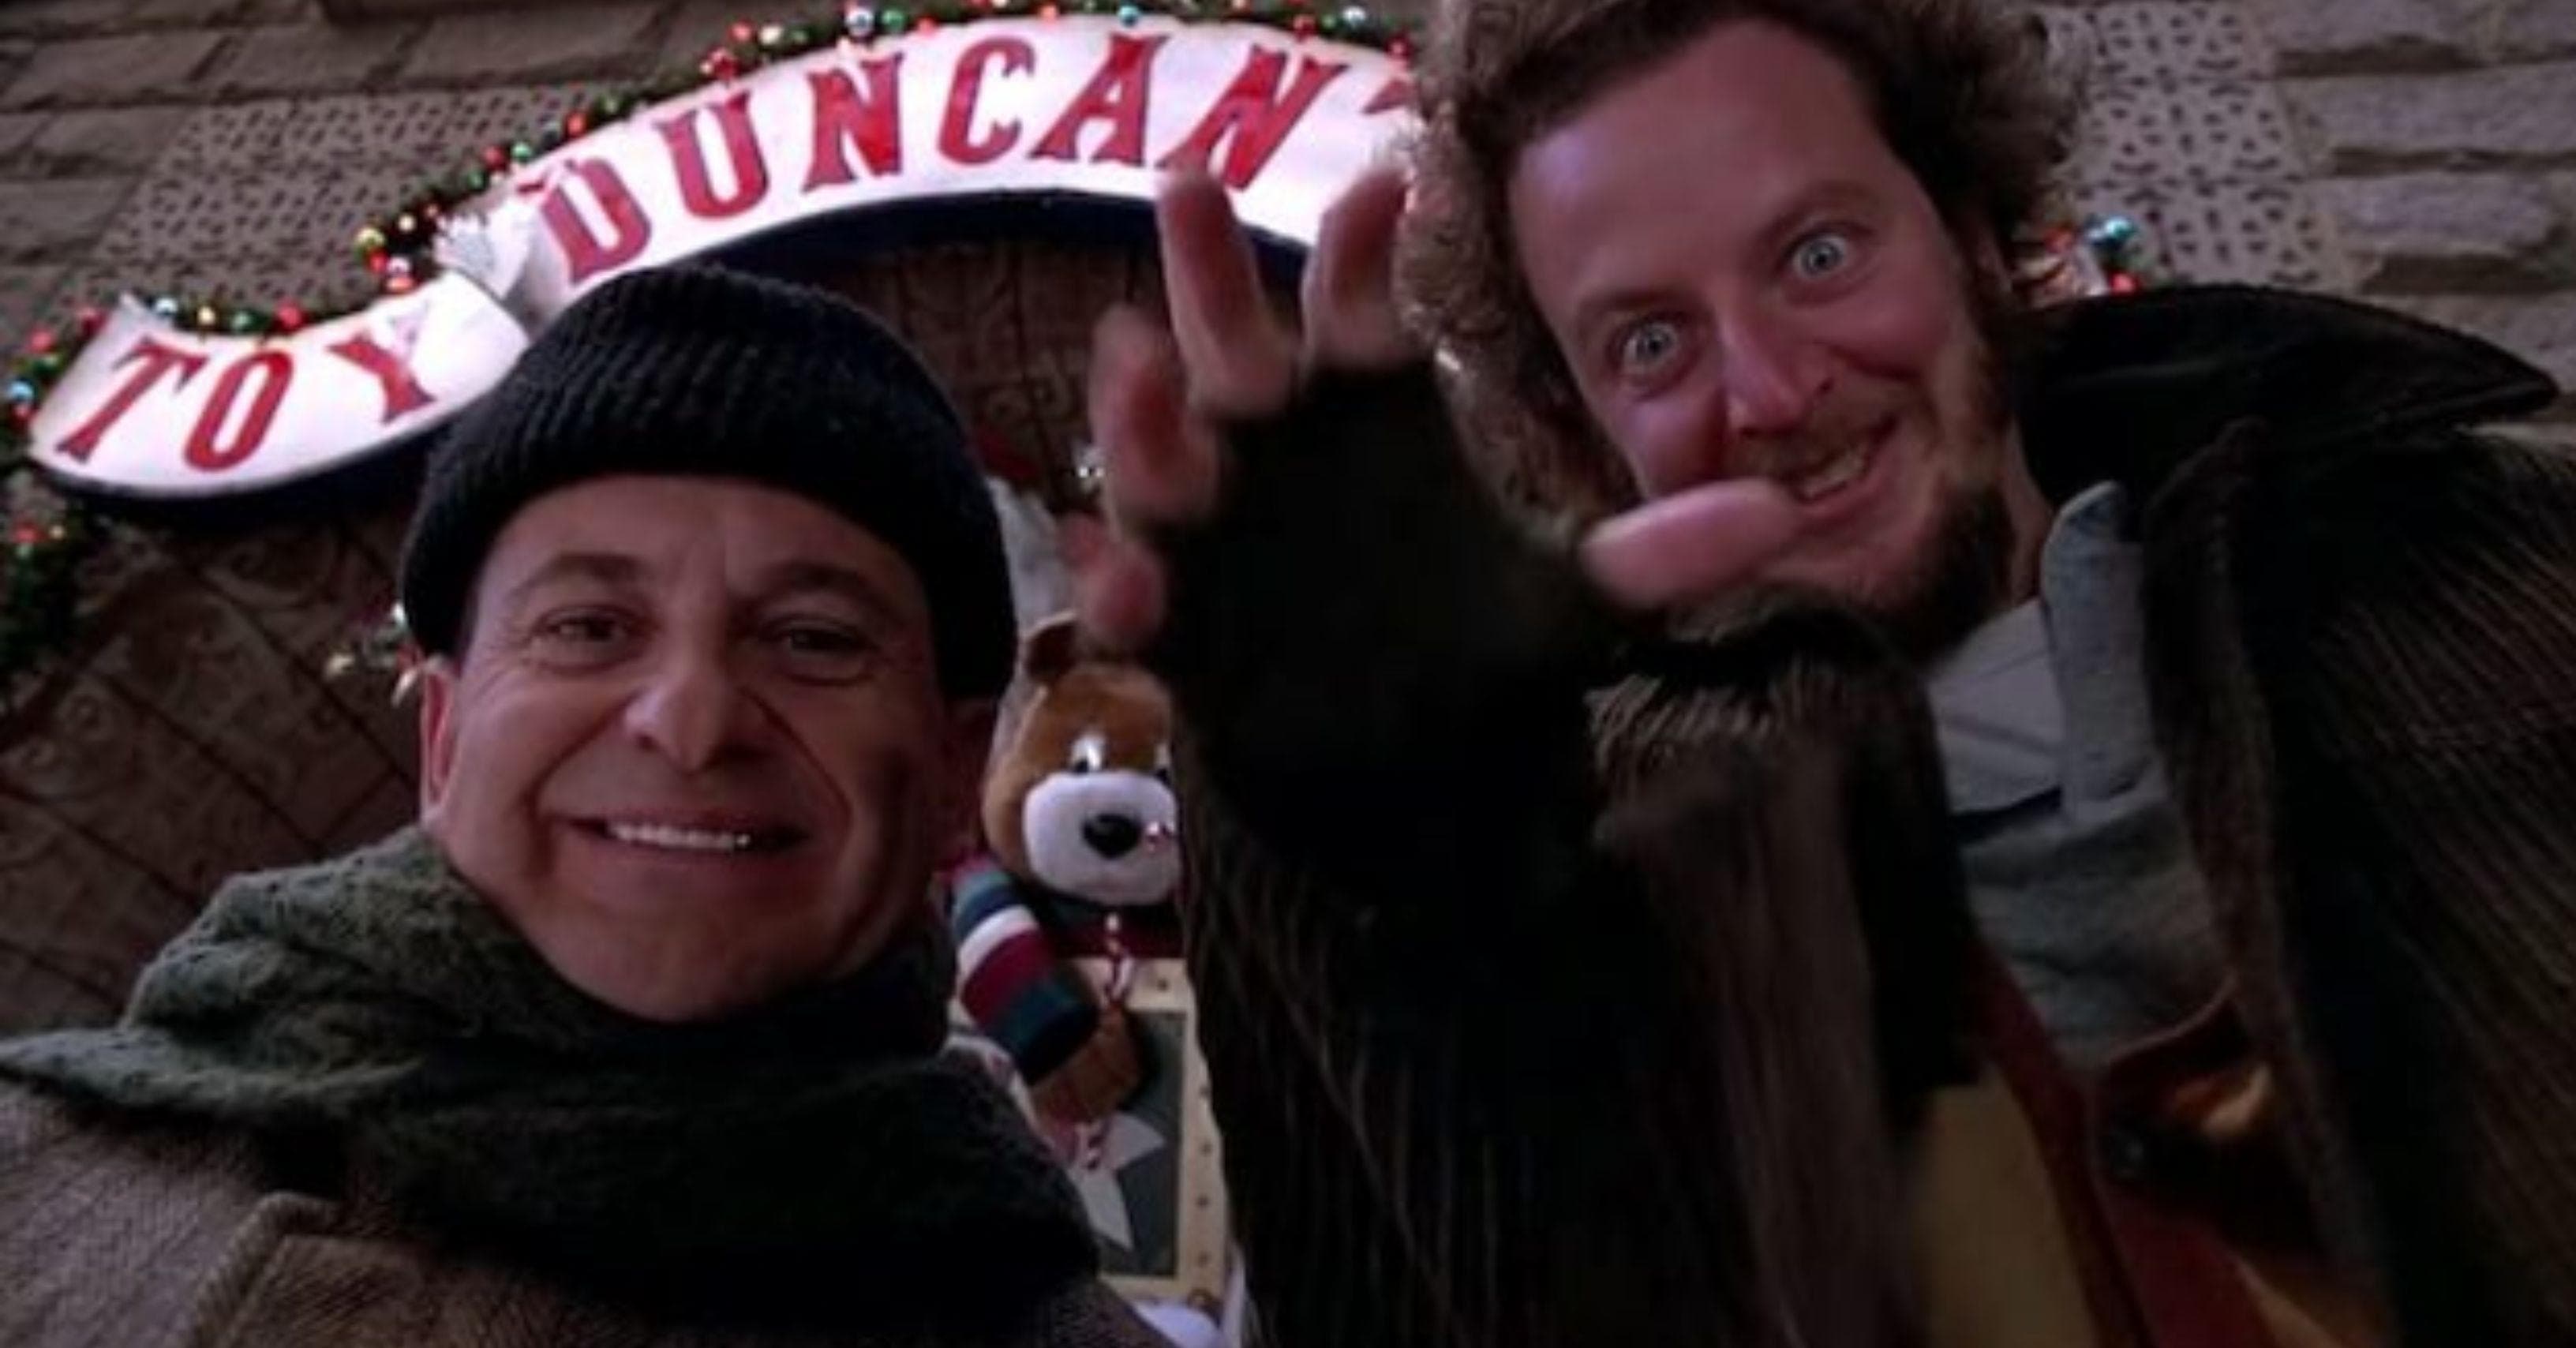 Stories About Joe Pesci Behind The Scenes Of 'Home Alone'